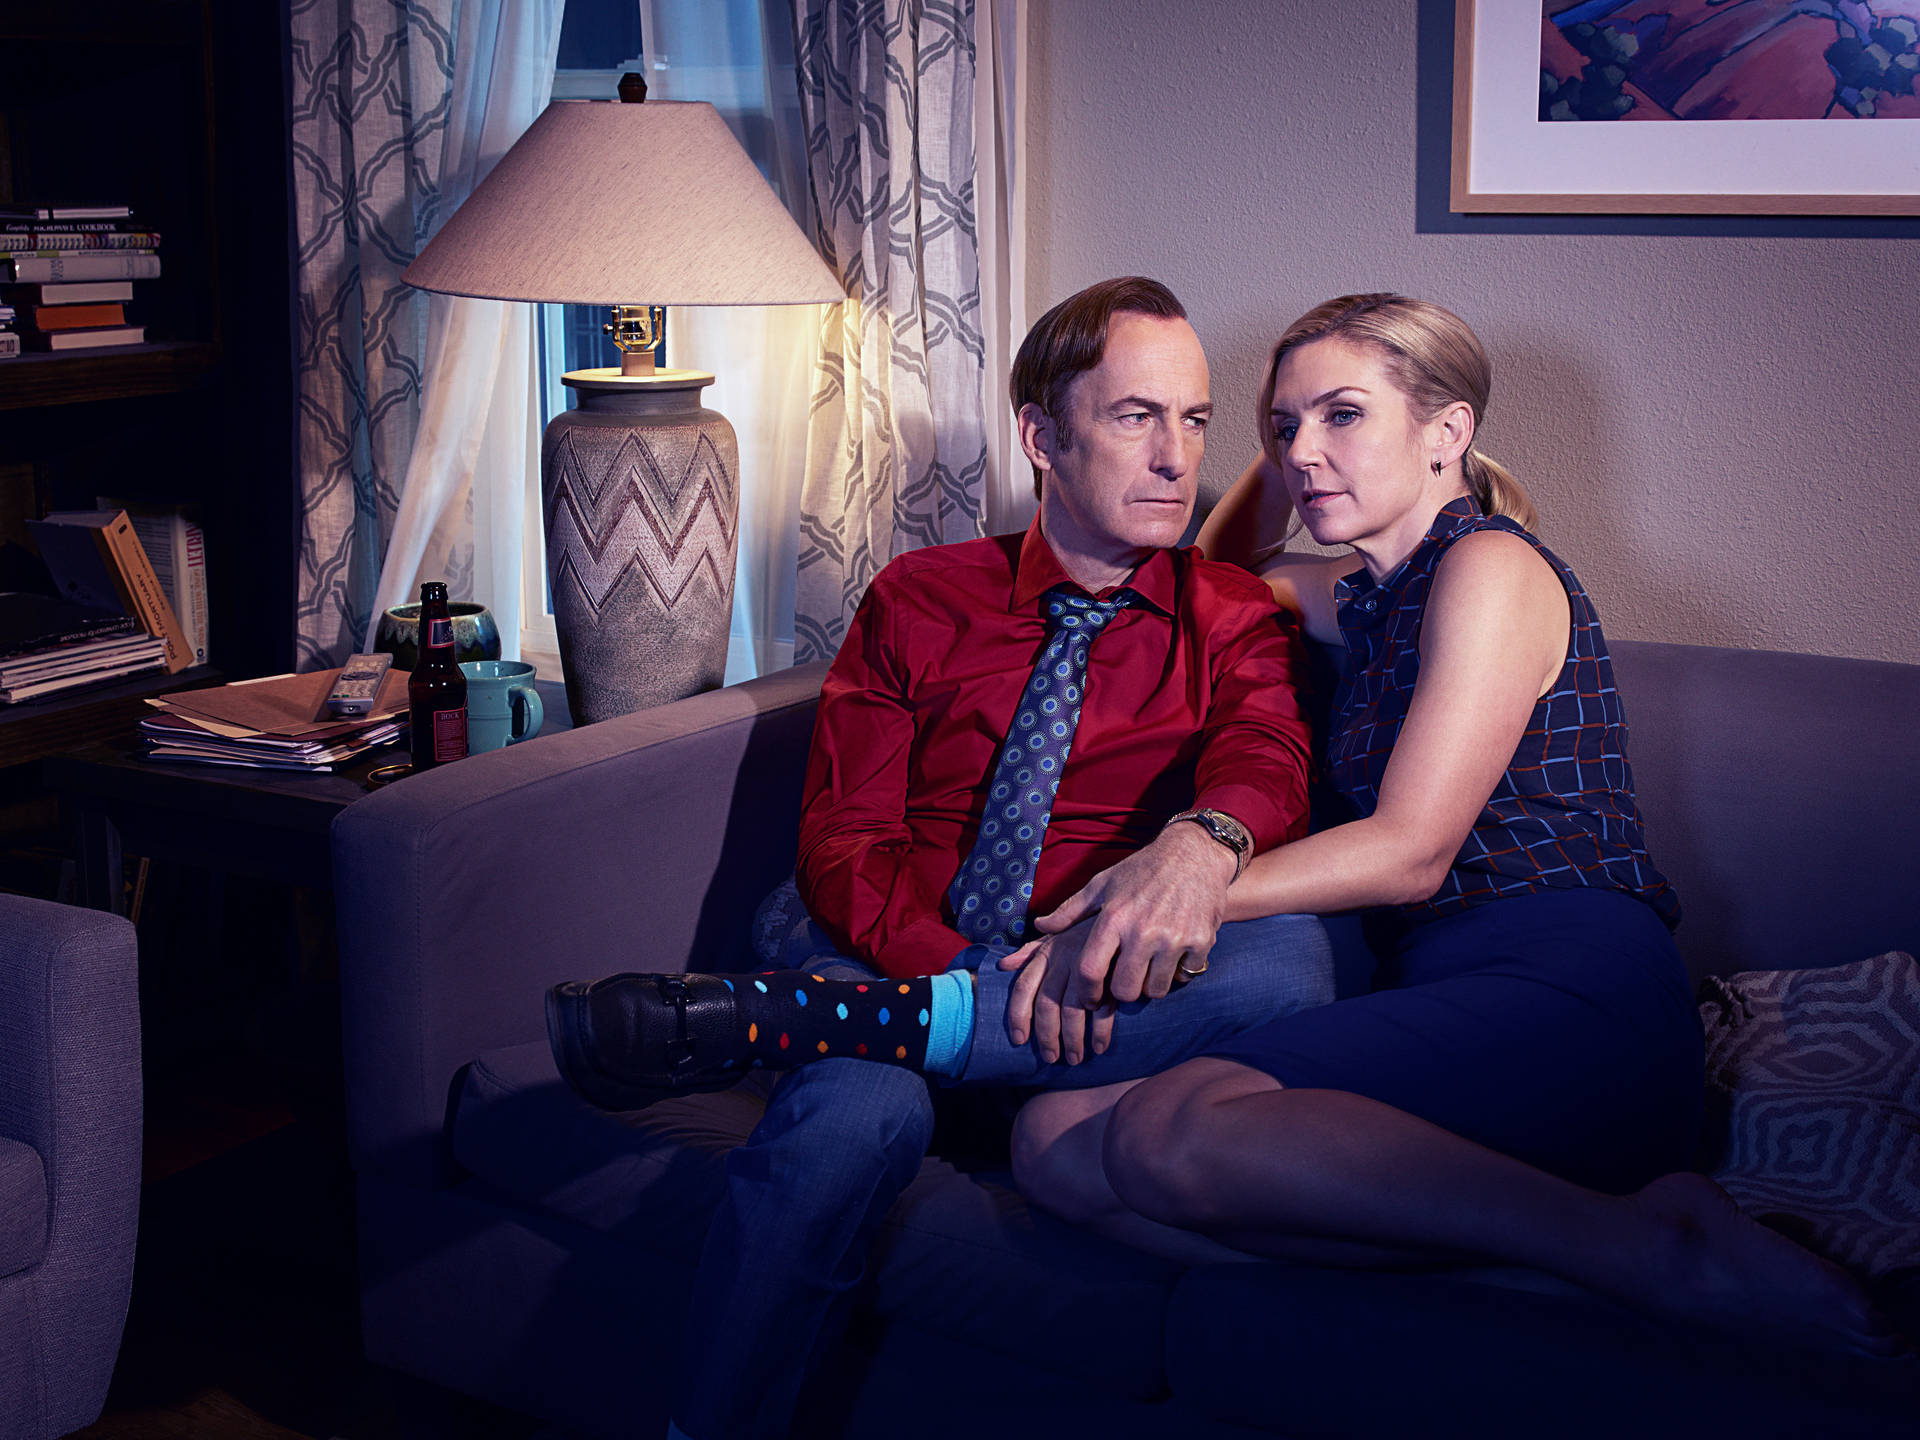 Caption: A Pivotal Moment Between Jimmy Mcgill And His Partner, Kim Wexler, In Better Call Saul. Background